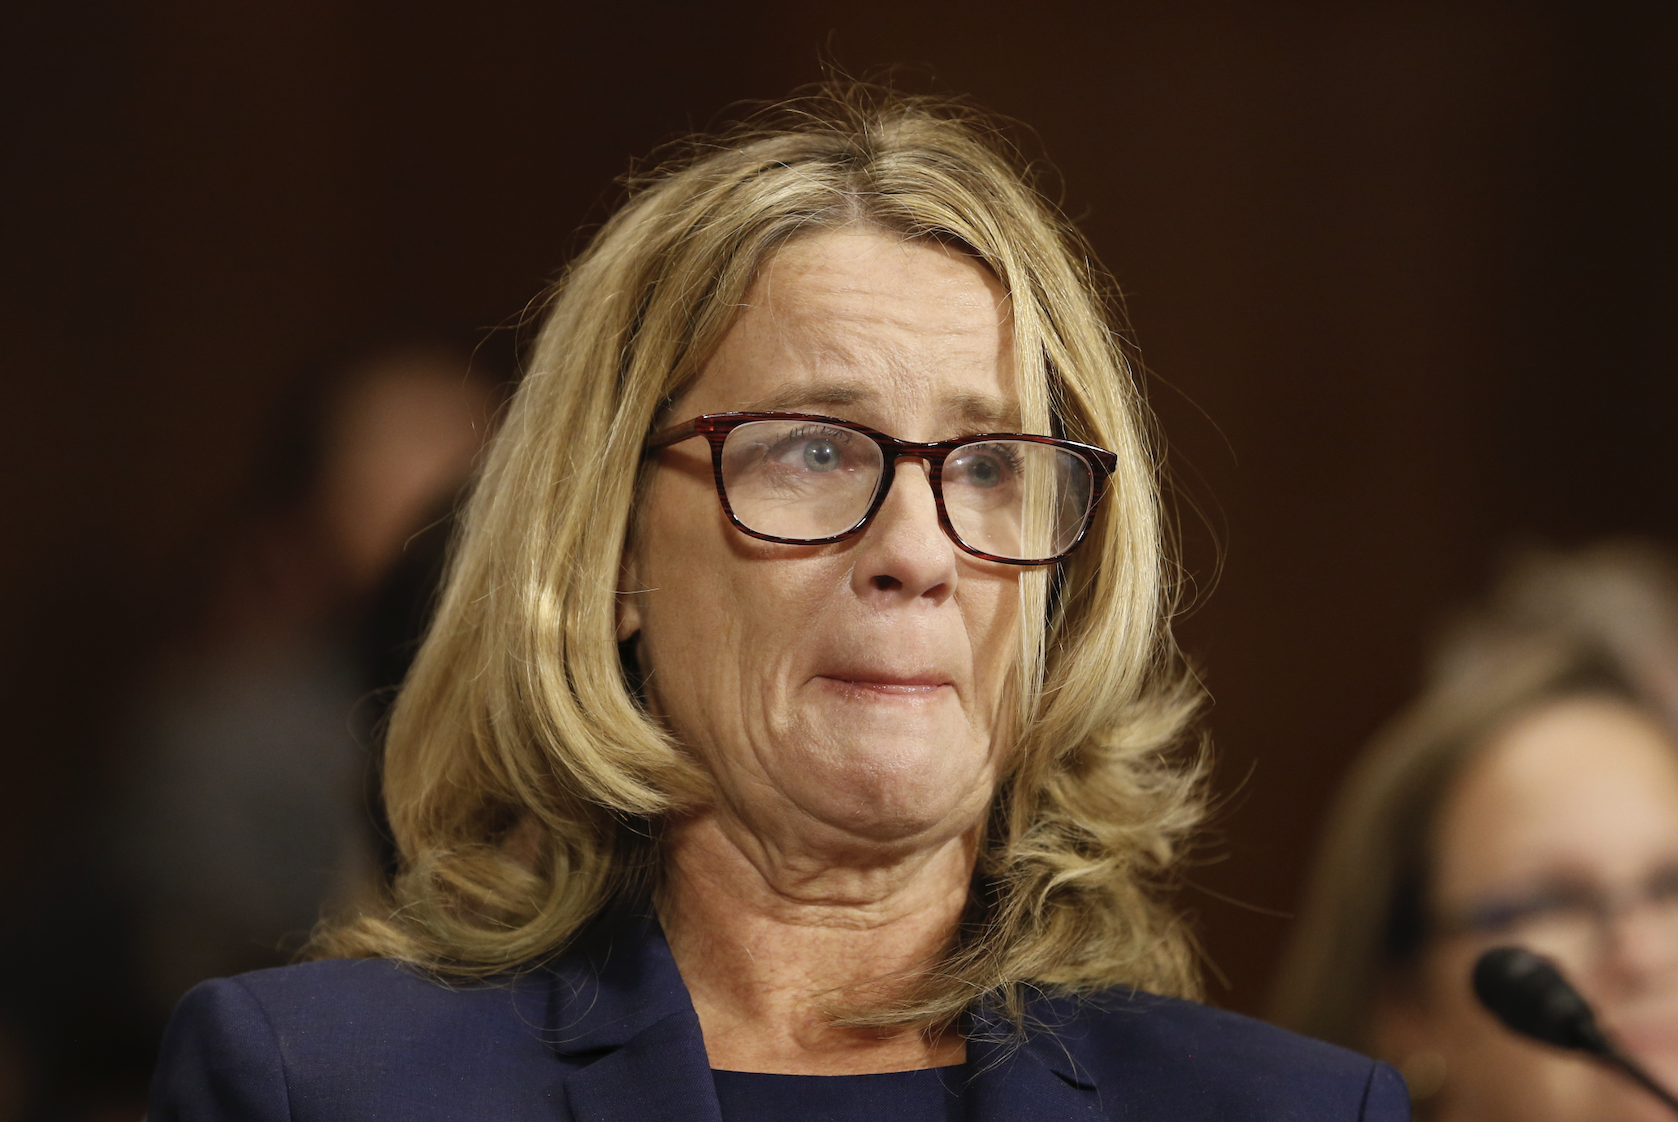 Christine Blasey Ford tearing up while testifying before Congress